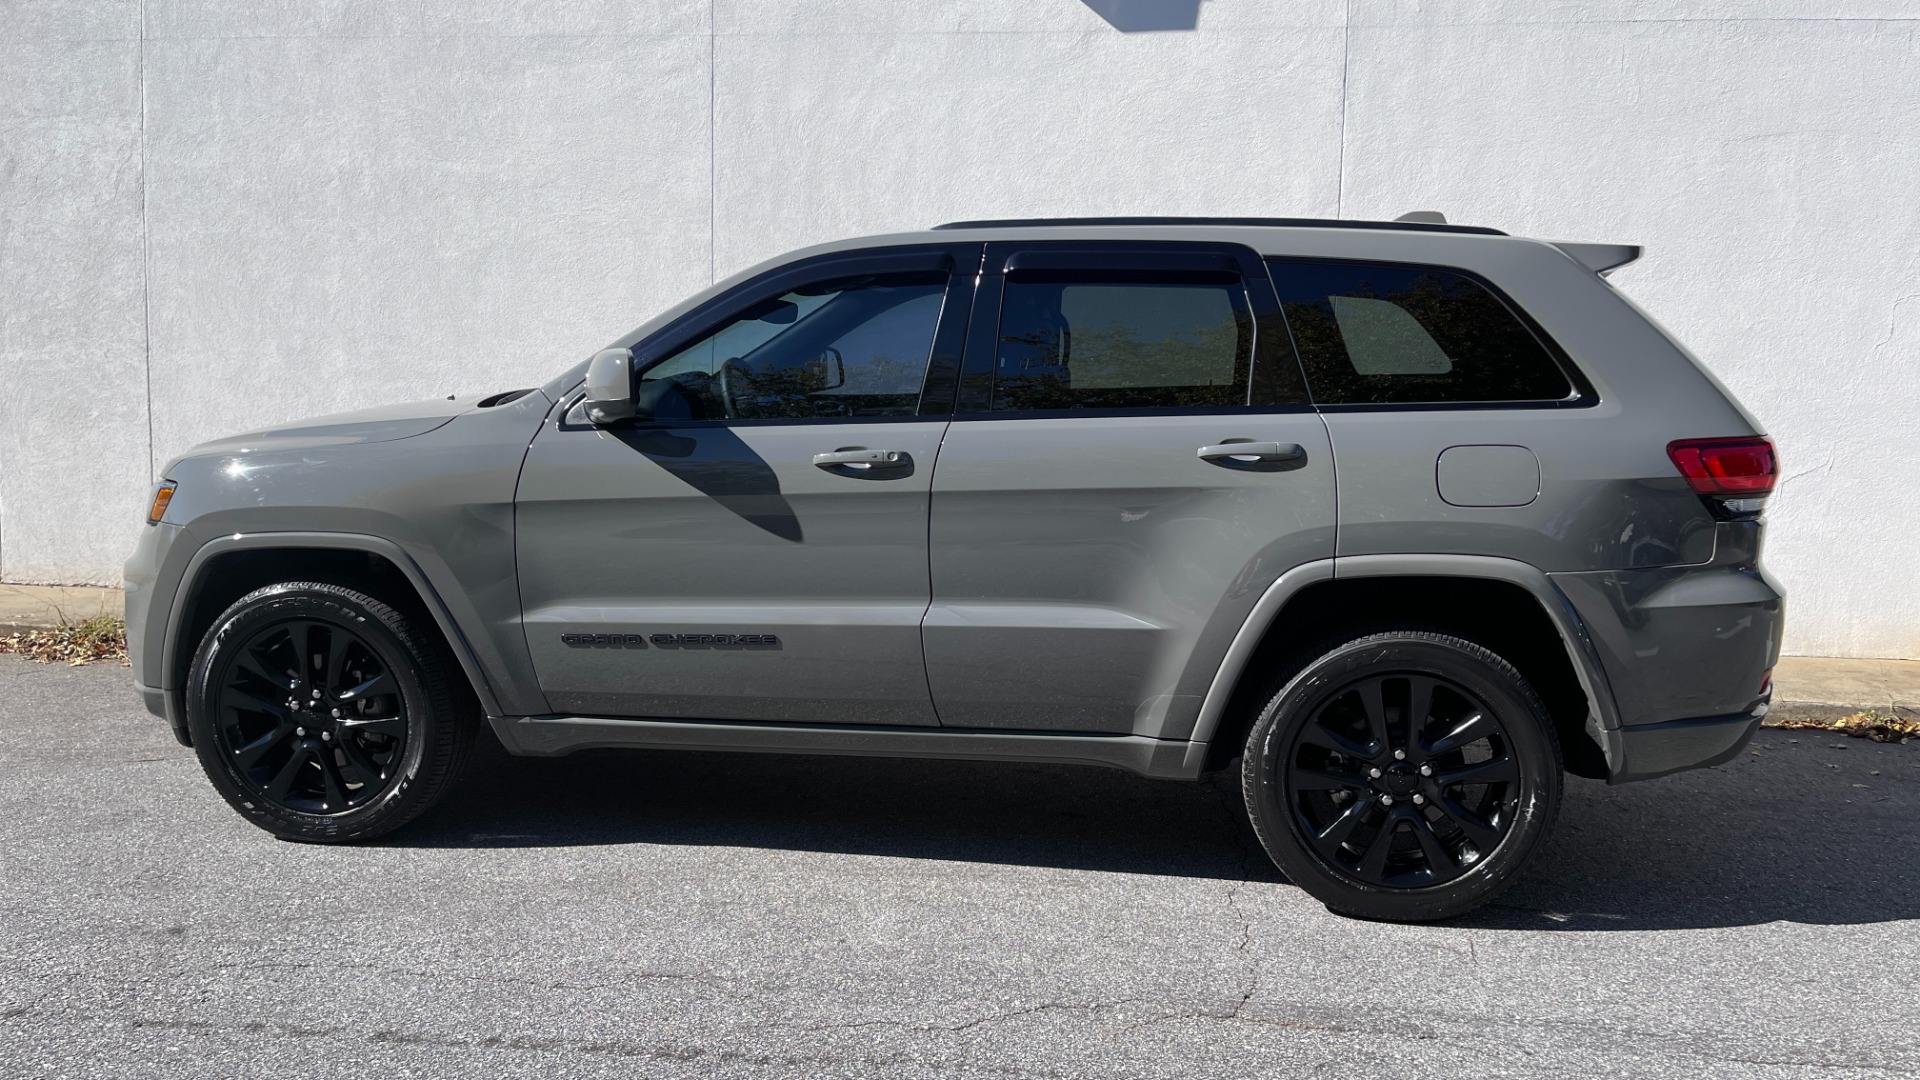 Used 2019 Jeep Grand Cherokee ALTITUDE / BLACK 20IN WHEELS / BLACK TRIM / SUNROOF / HEATED SEATS for sale $34,495 at Formula Imports in Charlotte NC 28227 7